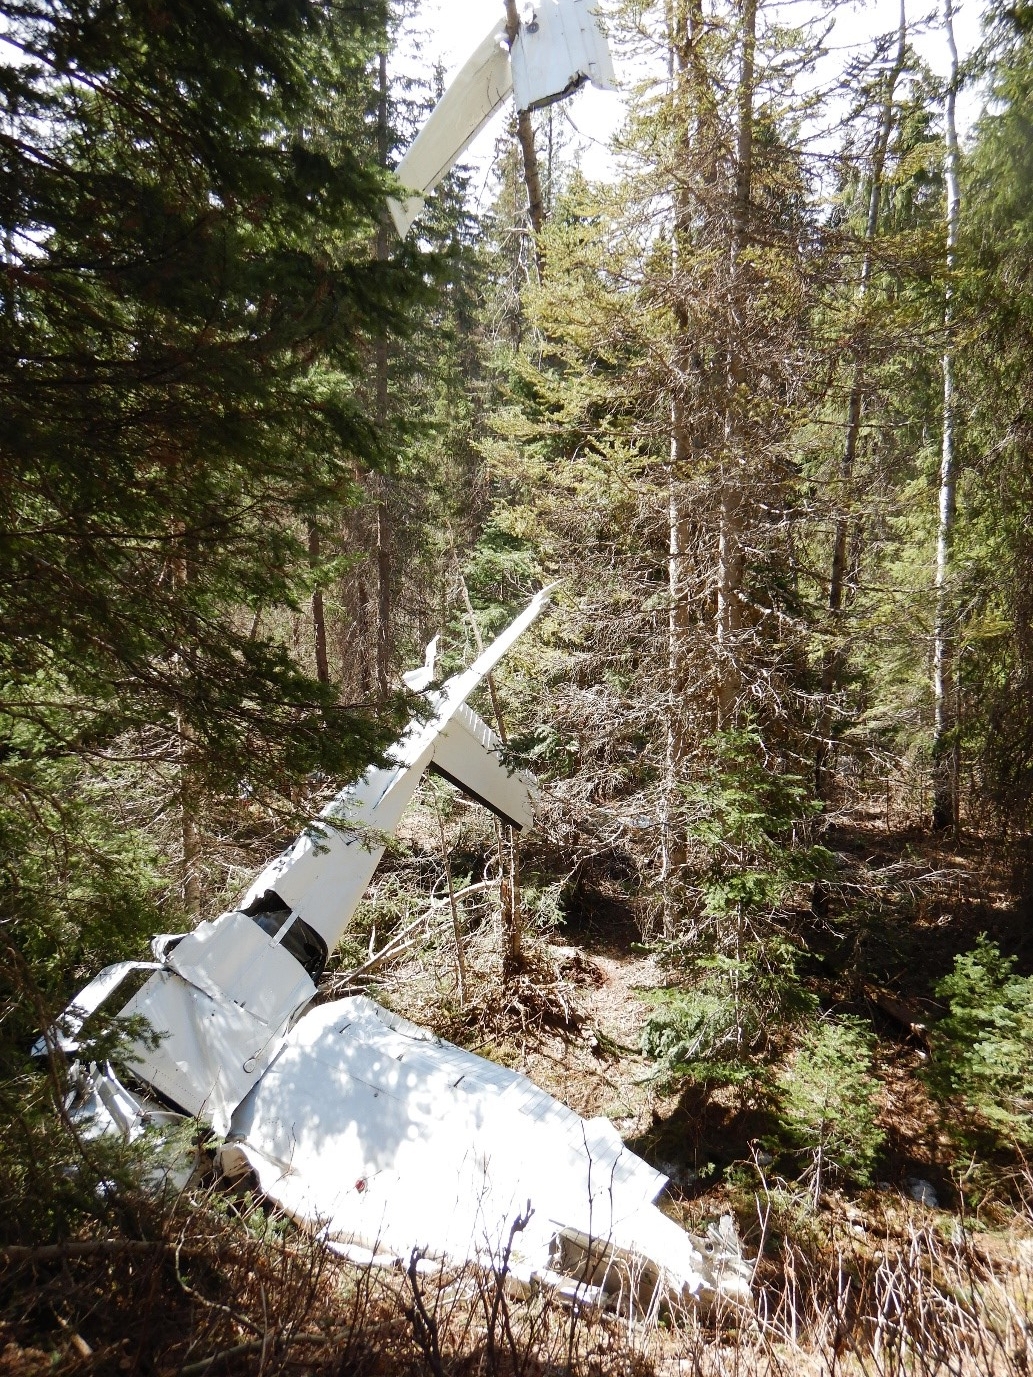 Wreckage of Cessna 182E aircraft found in densely wooded area near Smithers, B.C.